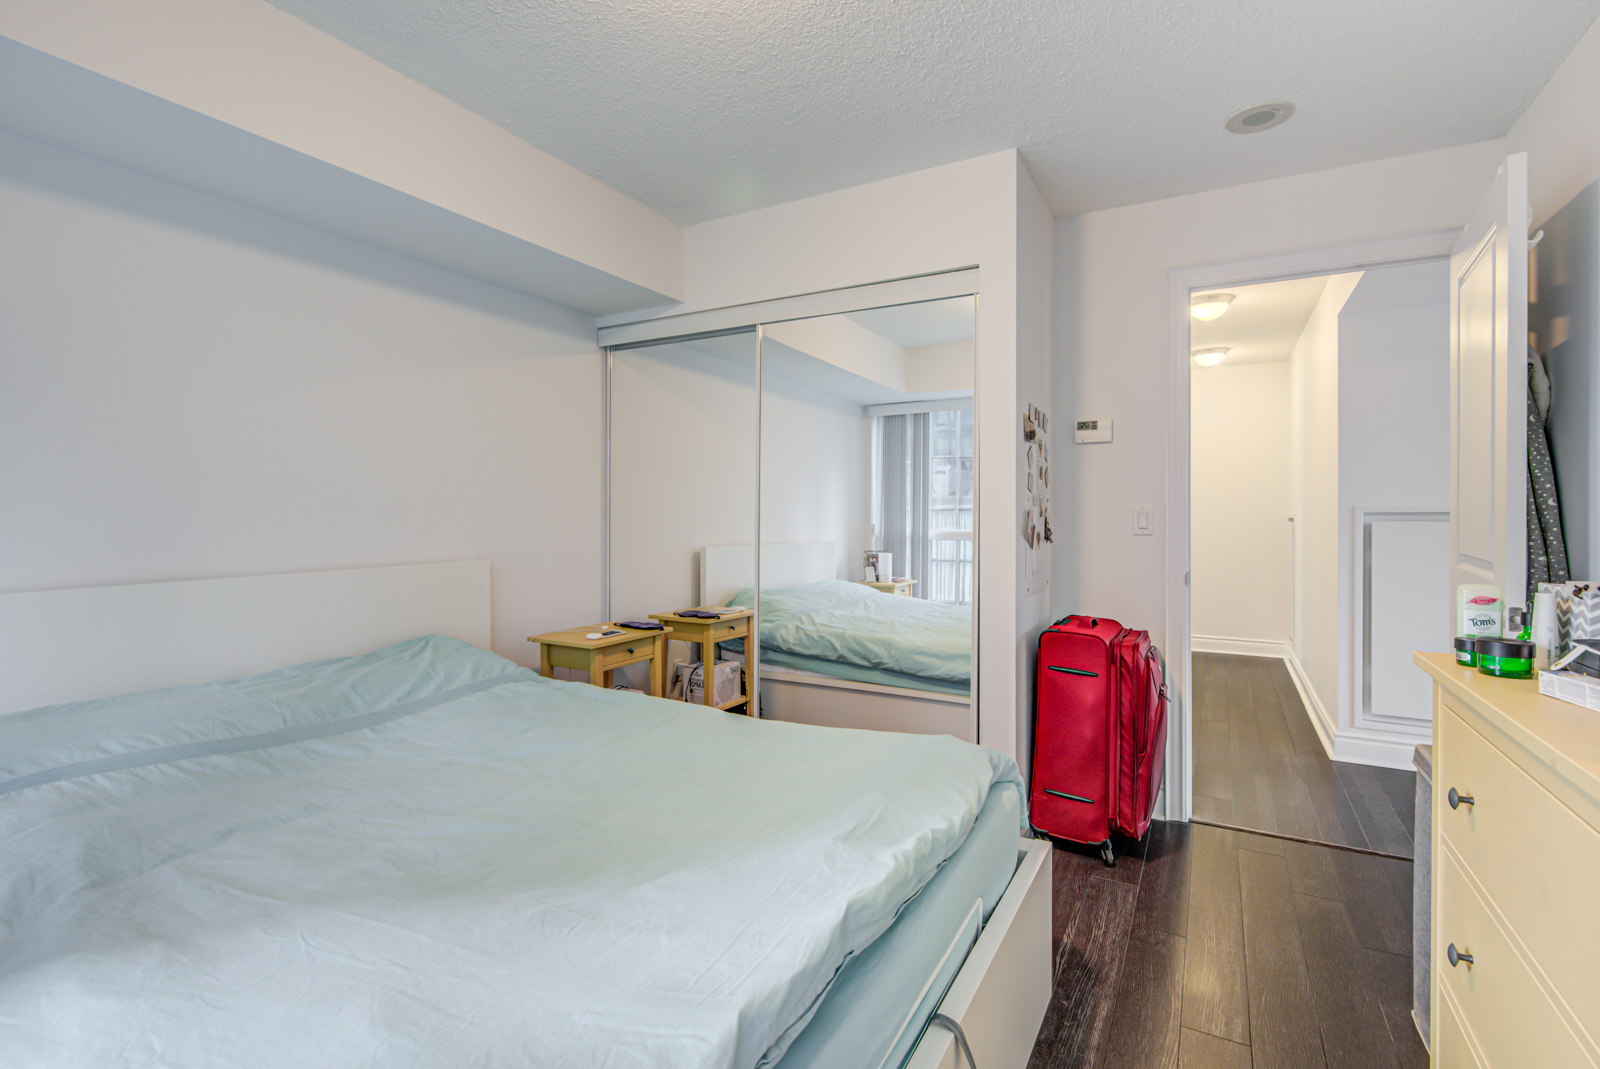 Bedroom with large white bed, sleek dark brown floors, red luggage bag, and closet with mirror doors.